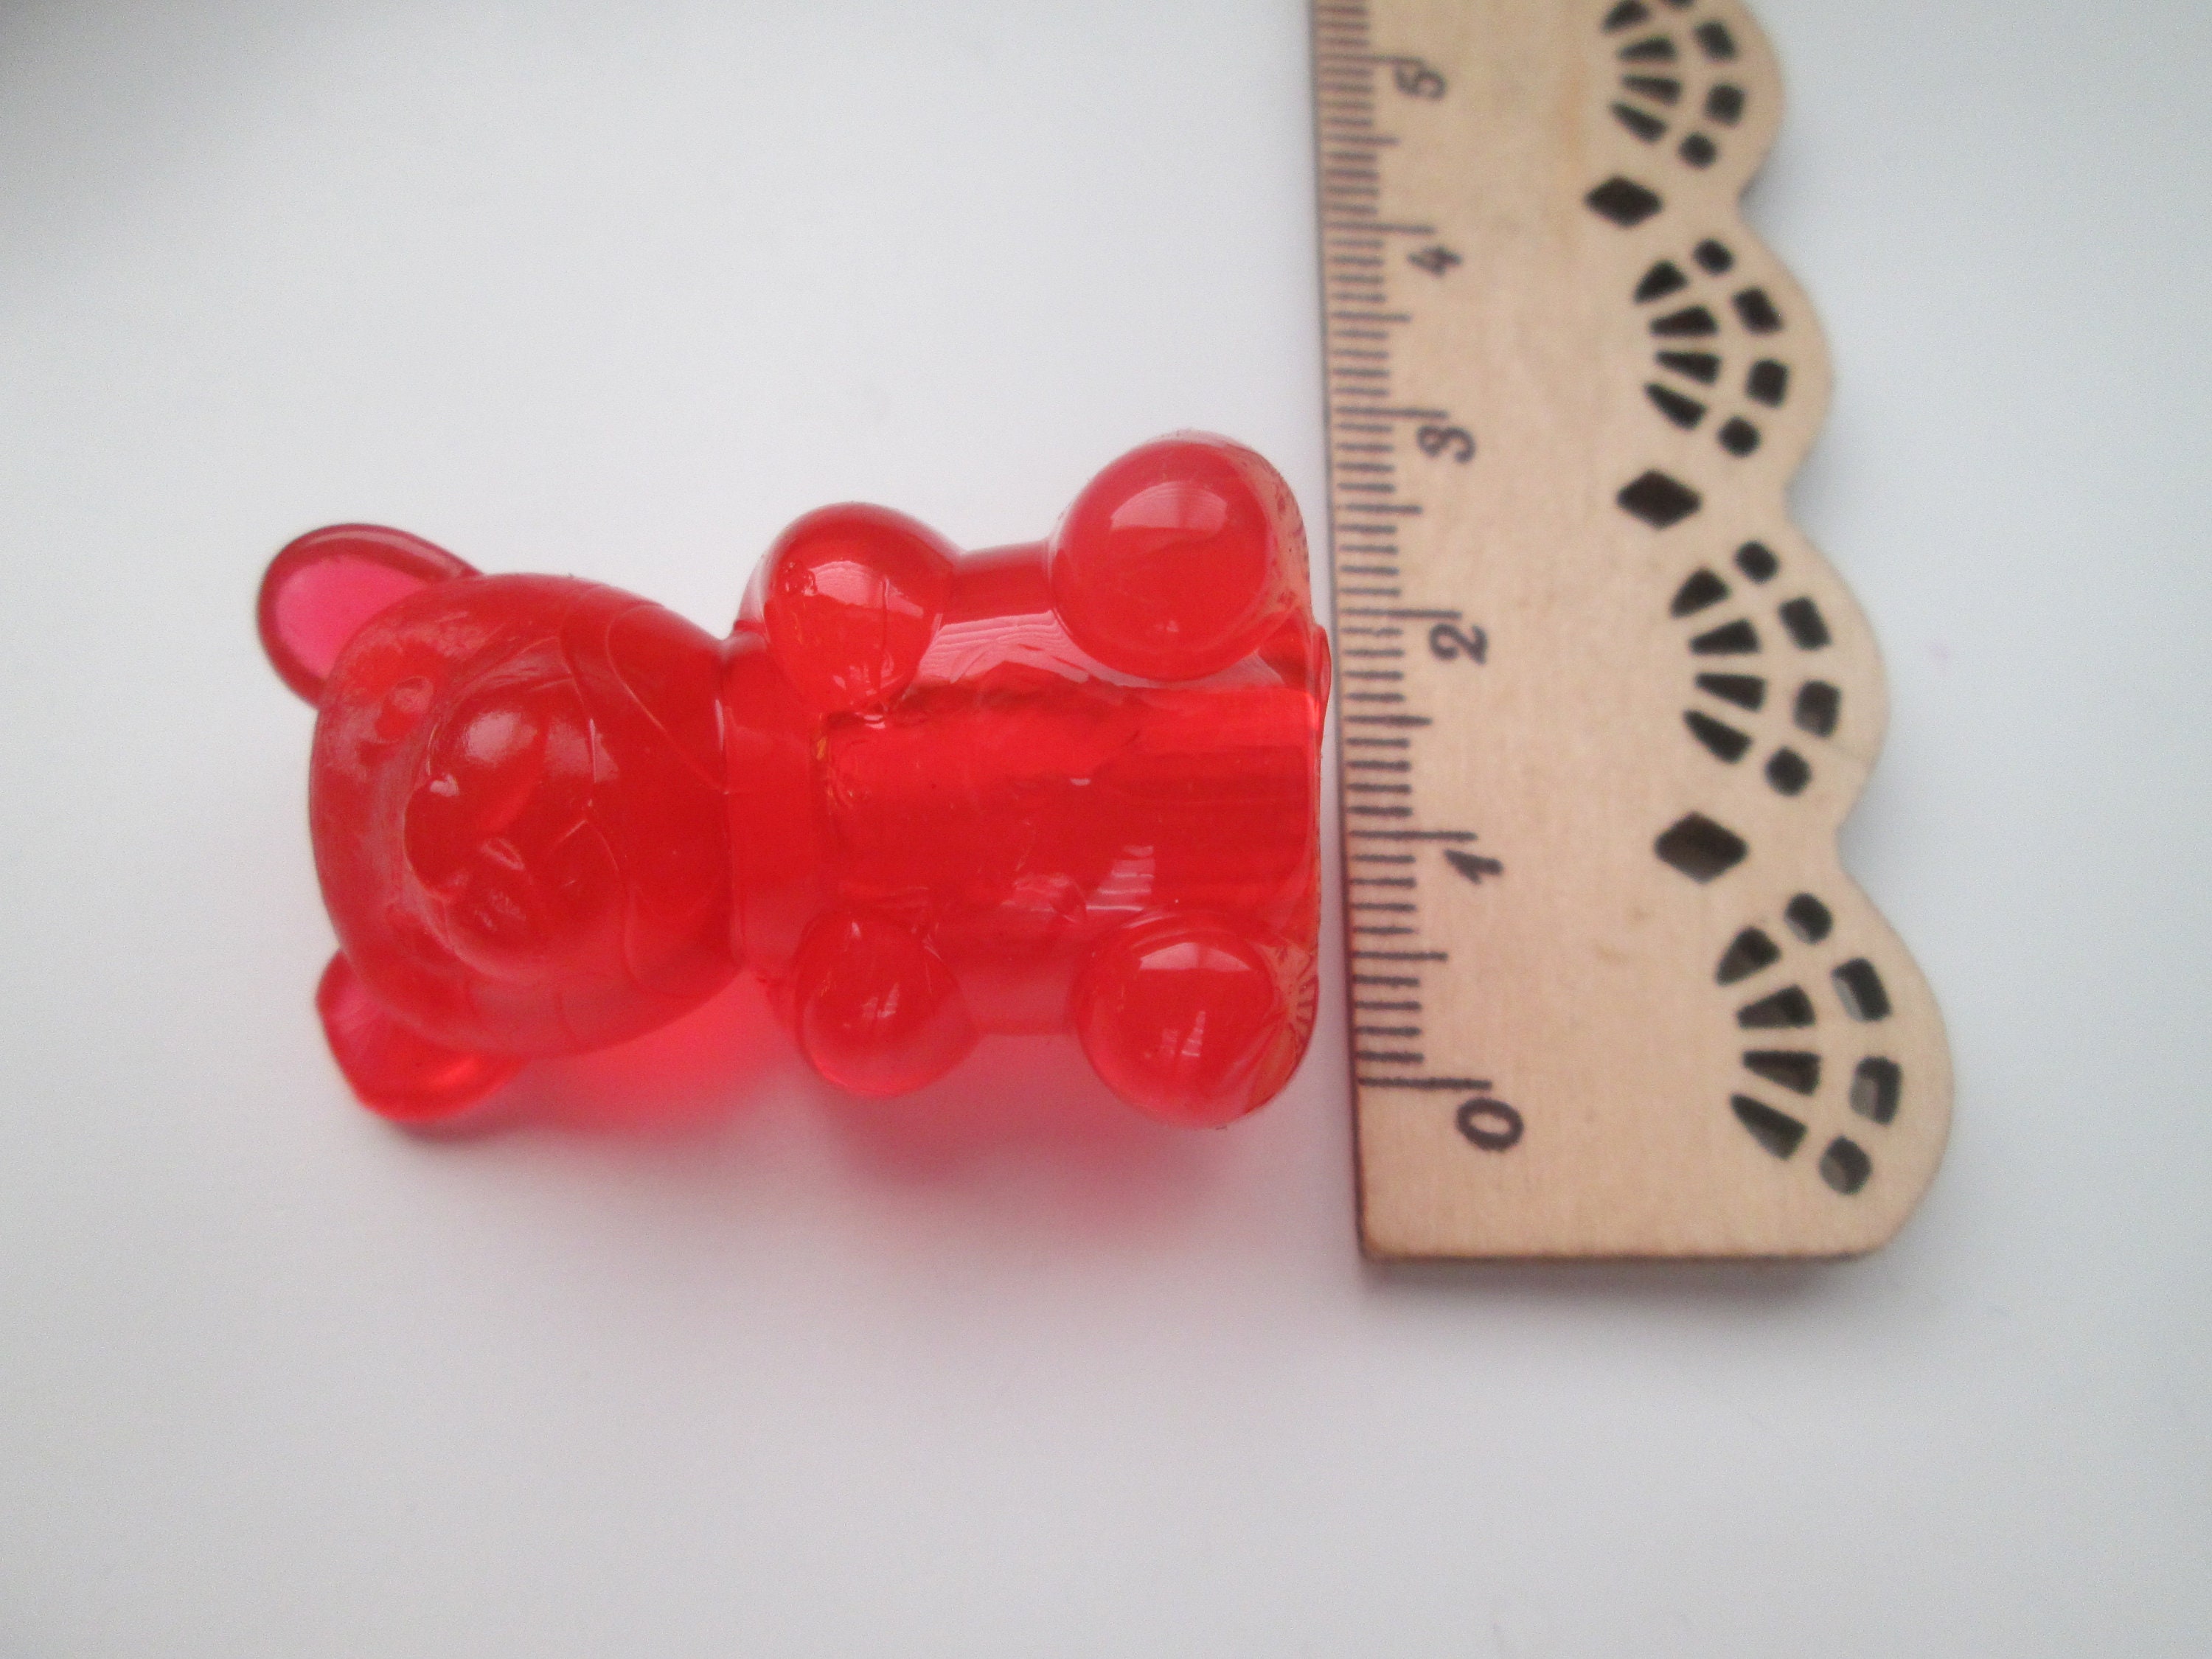 Scented Bear Erasers (36 ct.) (Incentive & Prize)